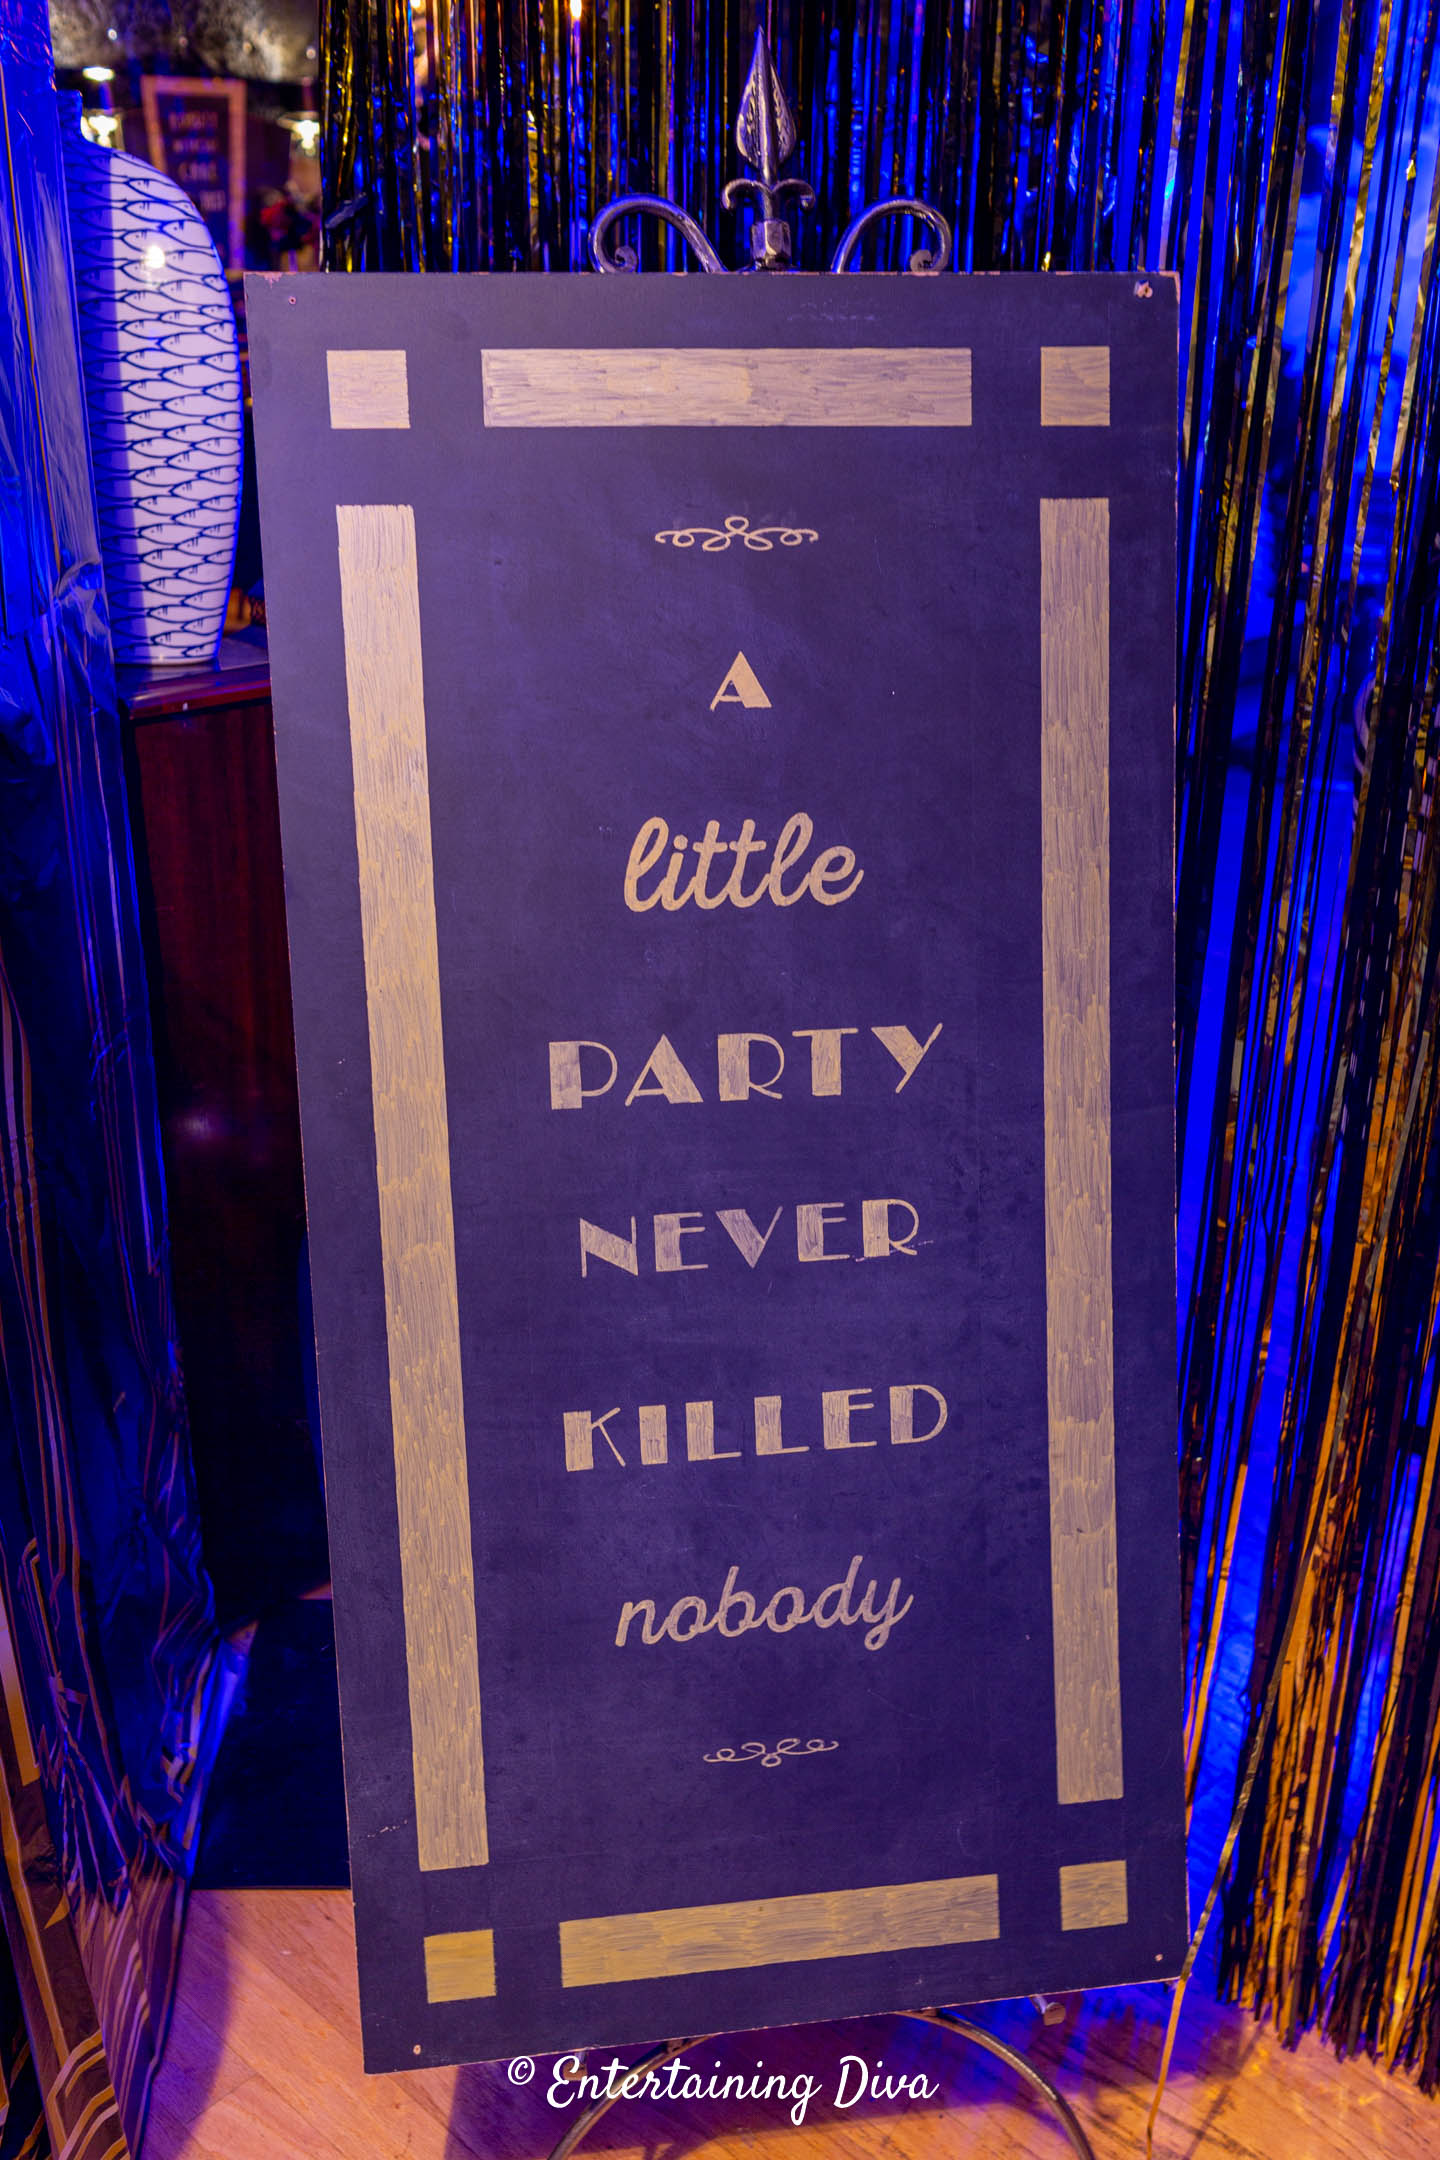 Gatsby party chalkboard sign "A Little Party Never Killed Nobody"